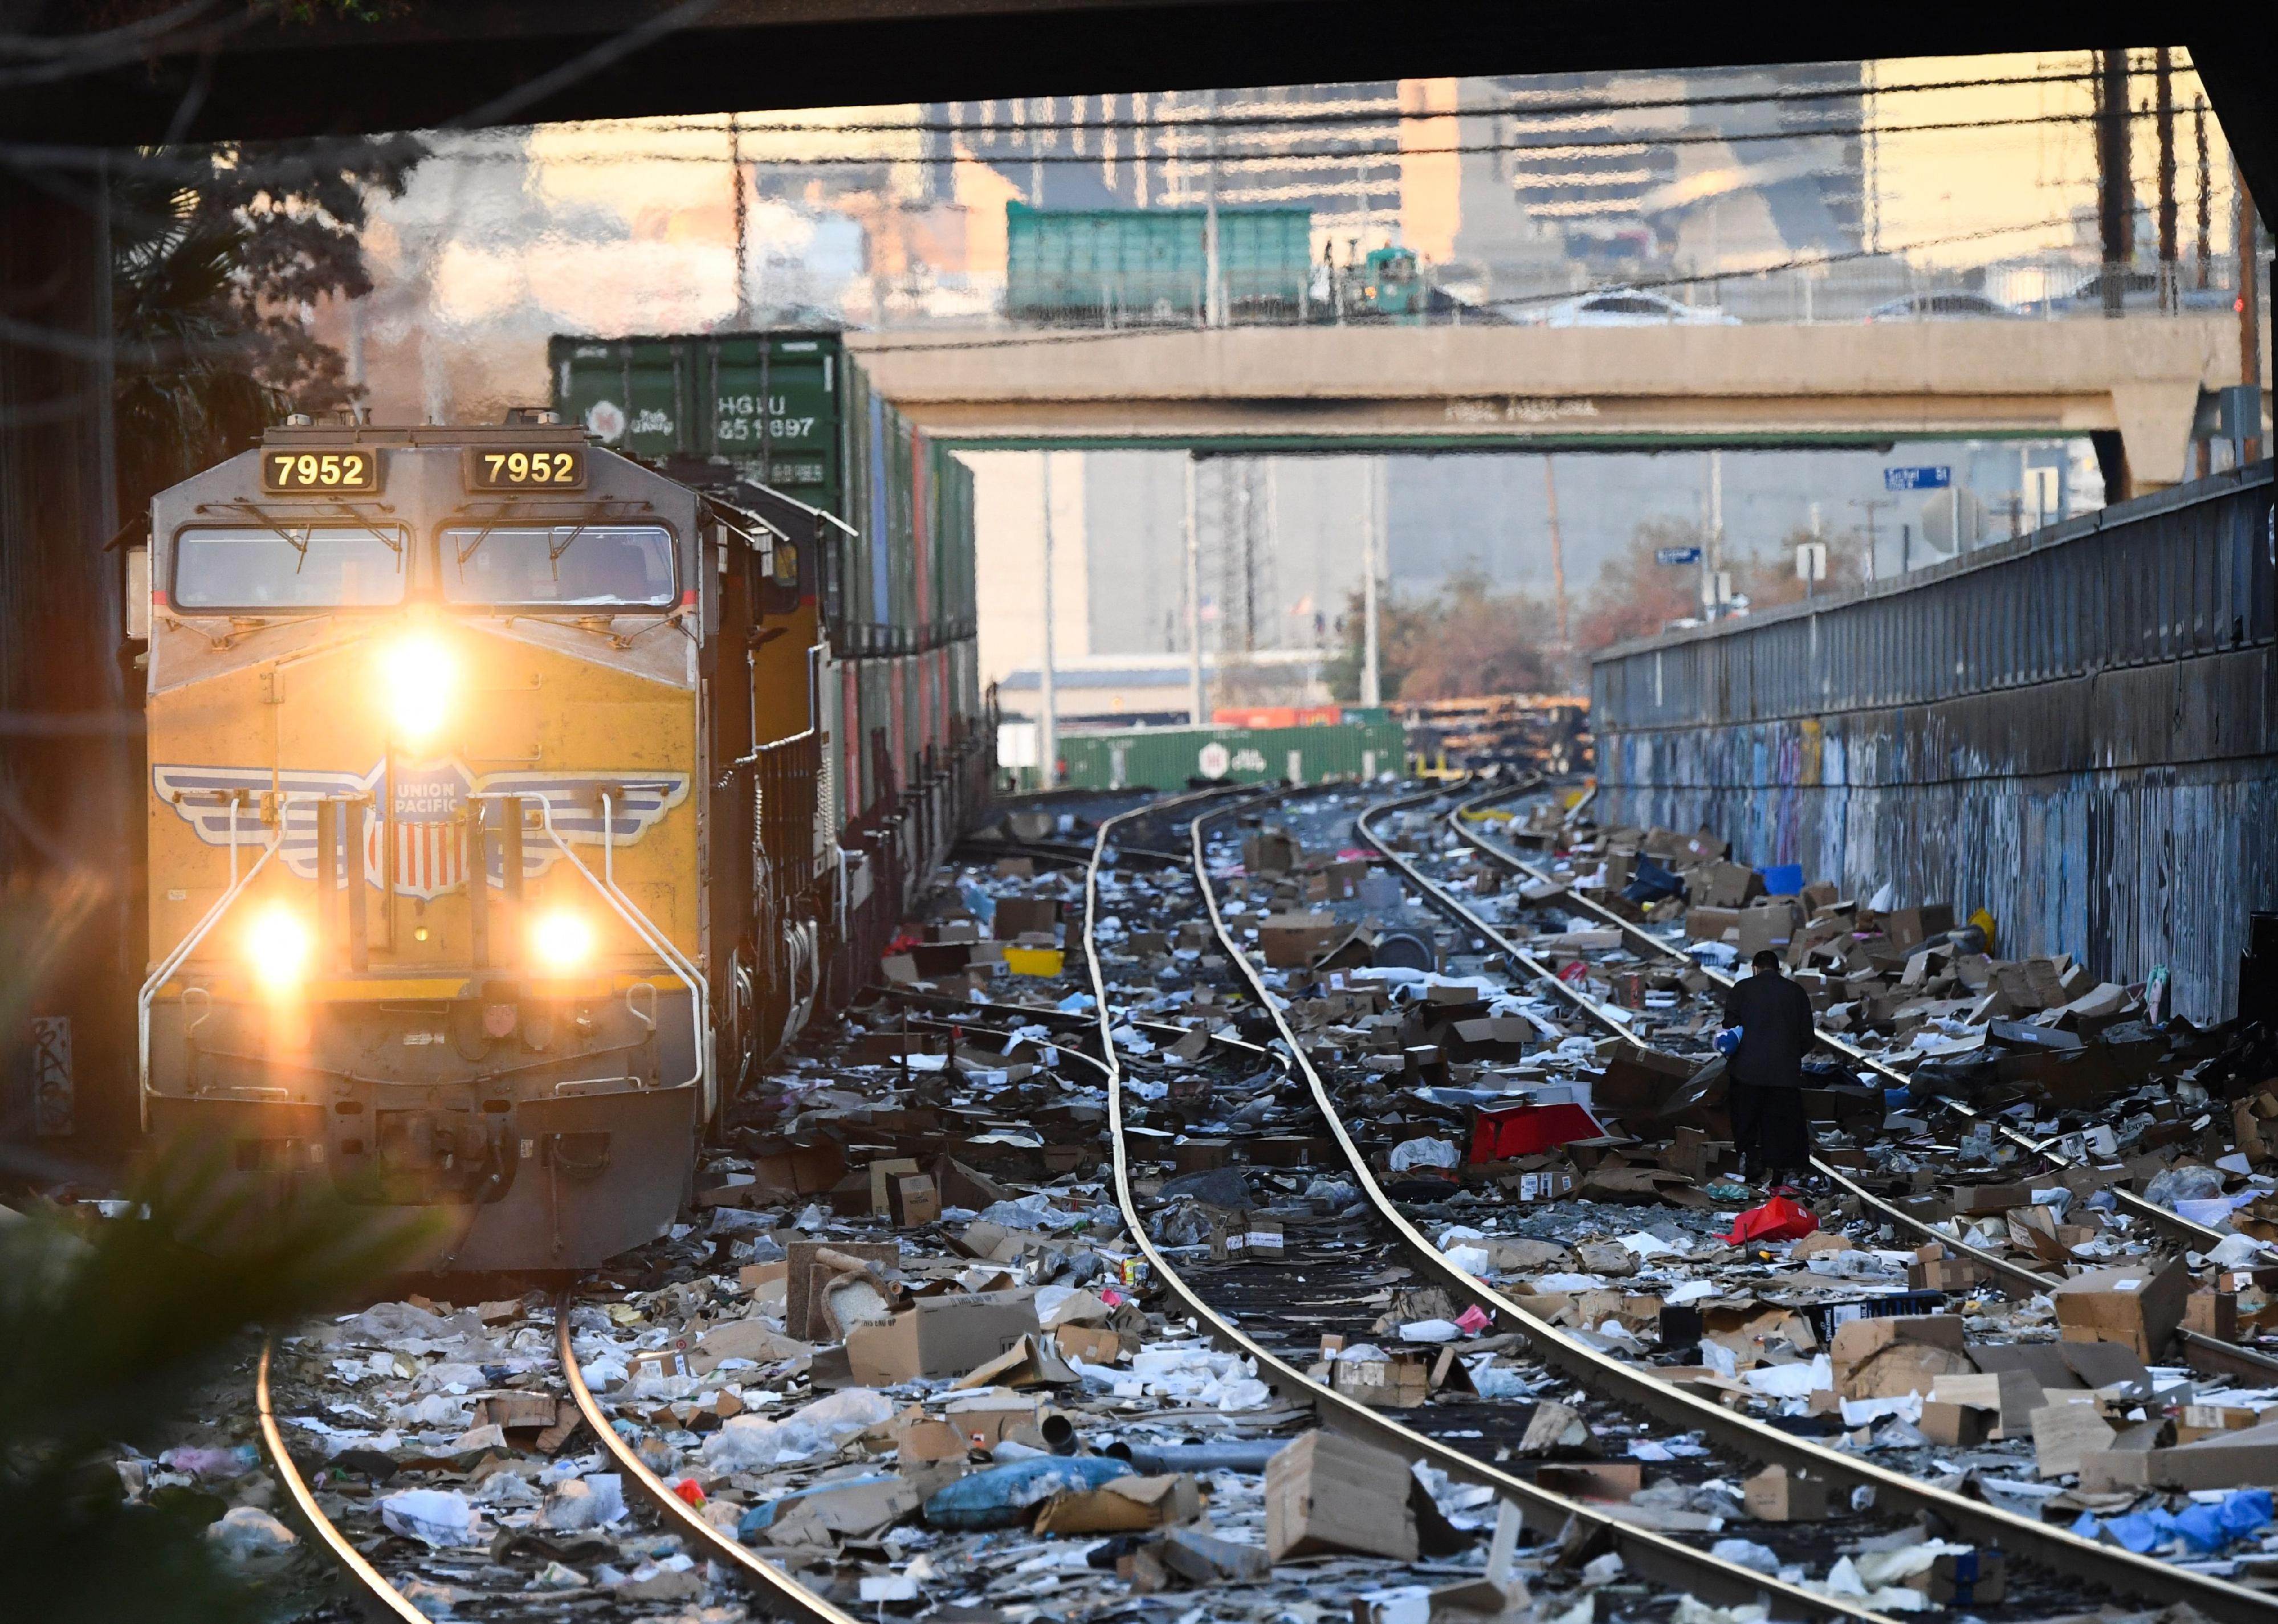 A person carries items collected from the train tracks as a Union Pacific locomotive passes through a section of Union Pacific train tracks littered with thousands of opened boxes and garbage.